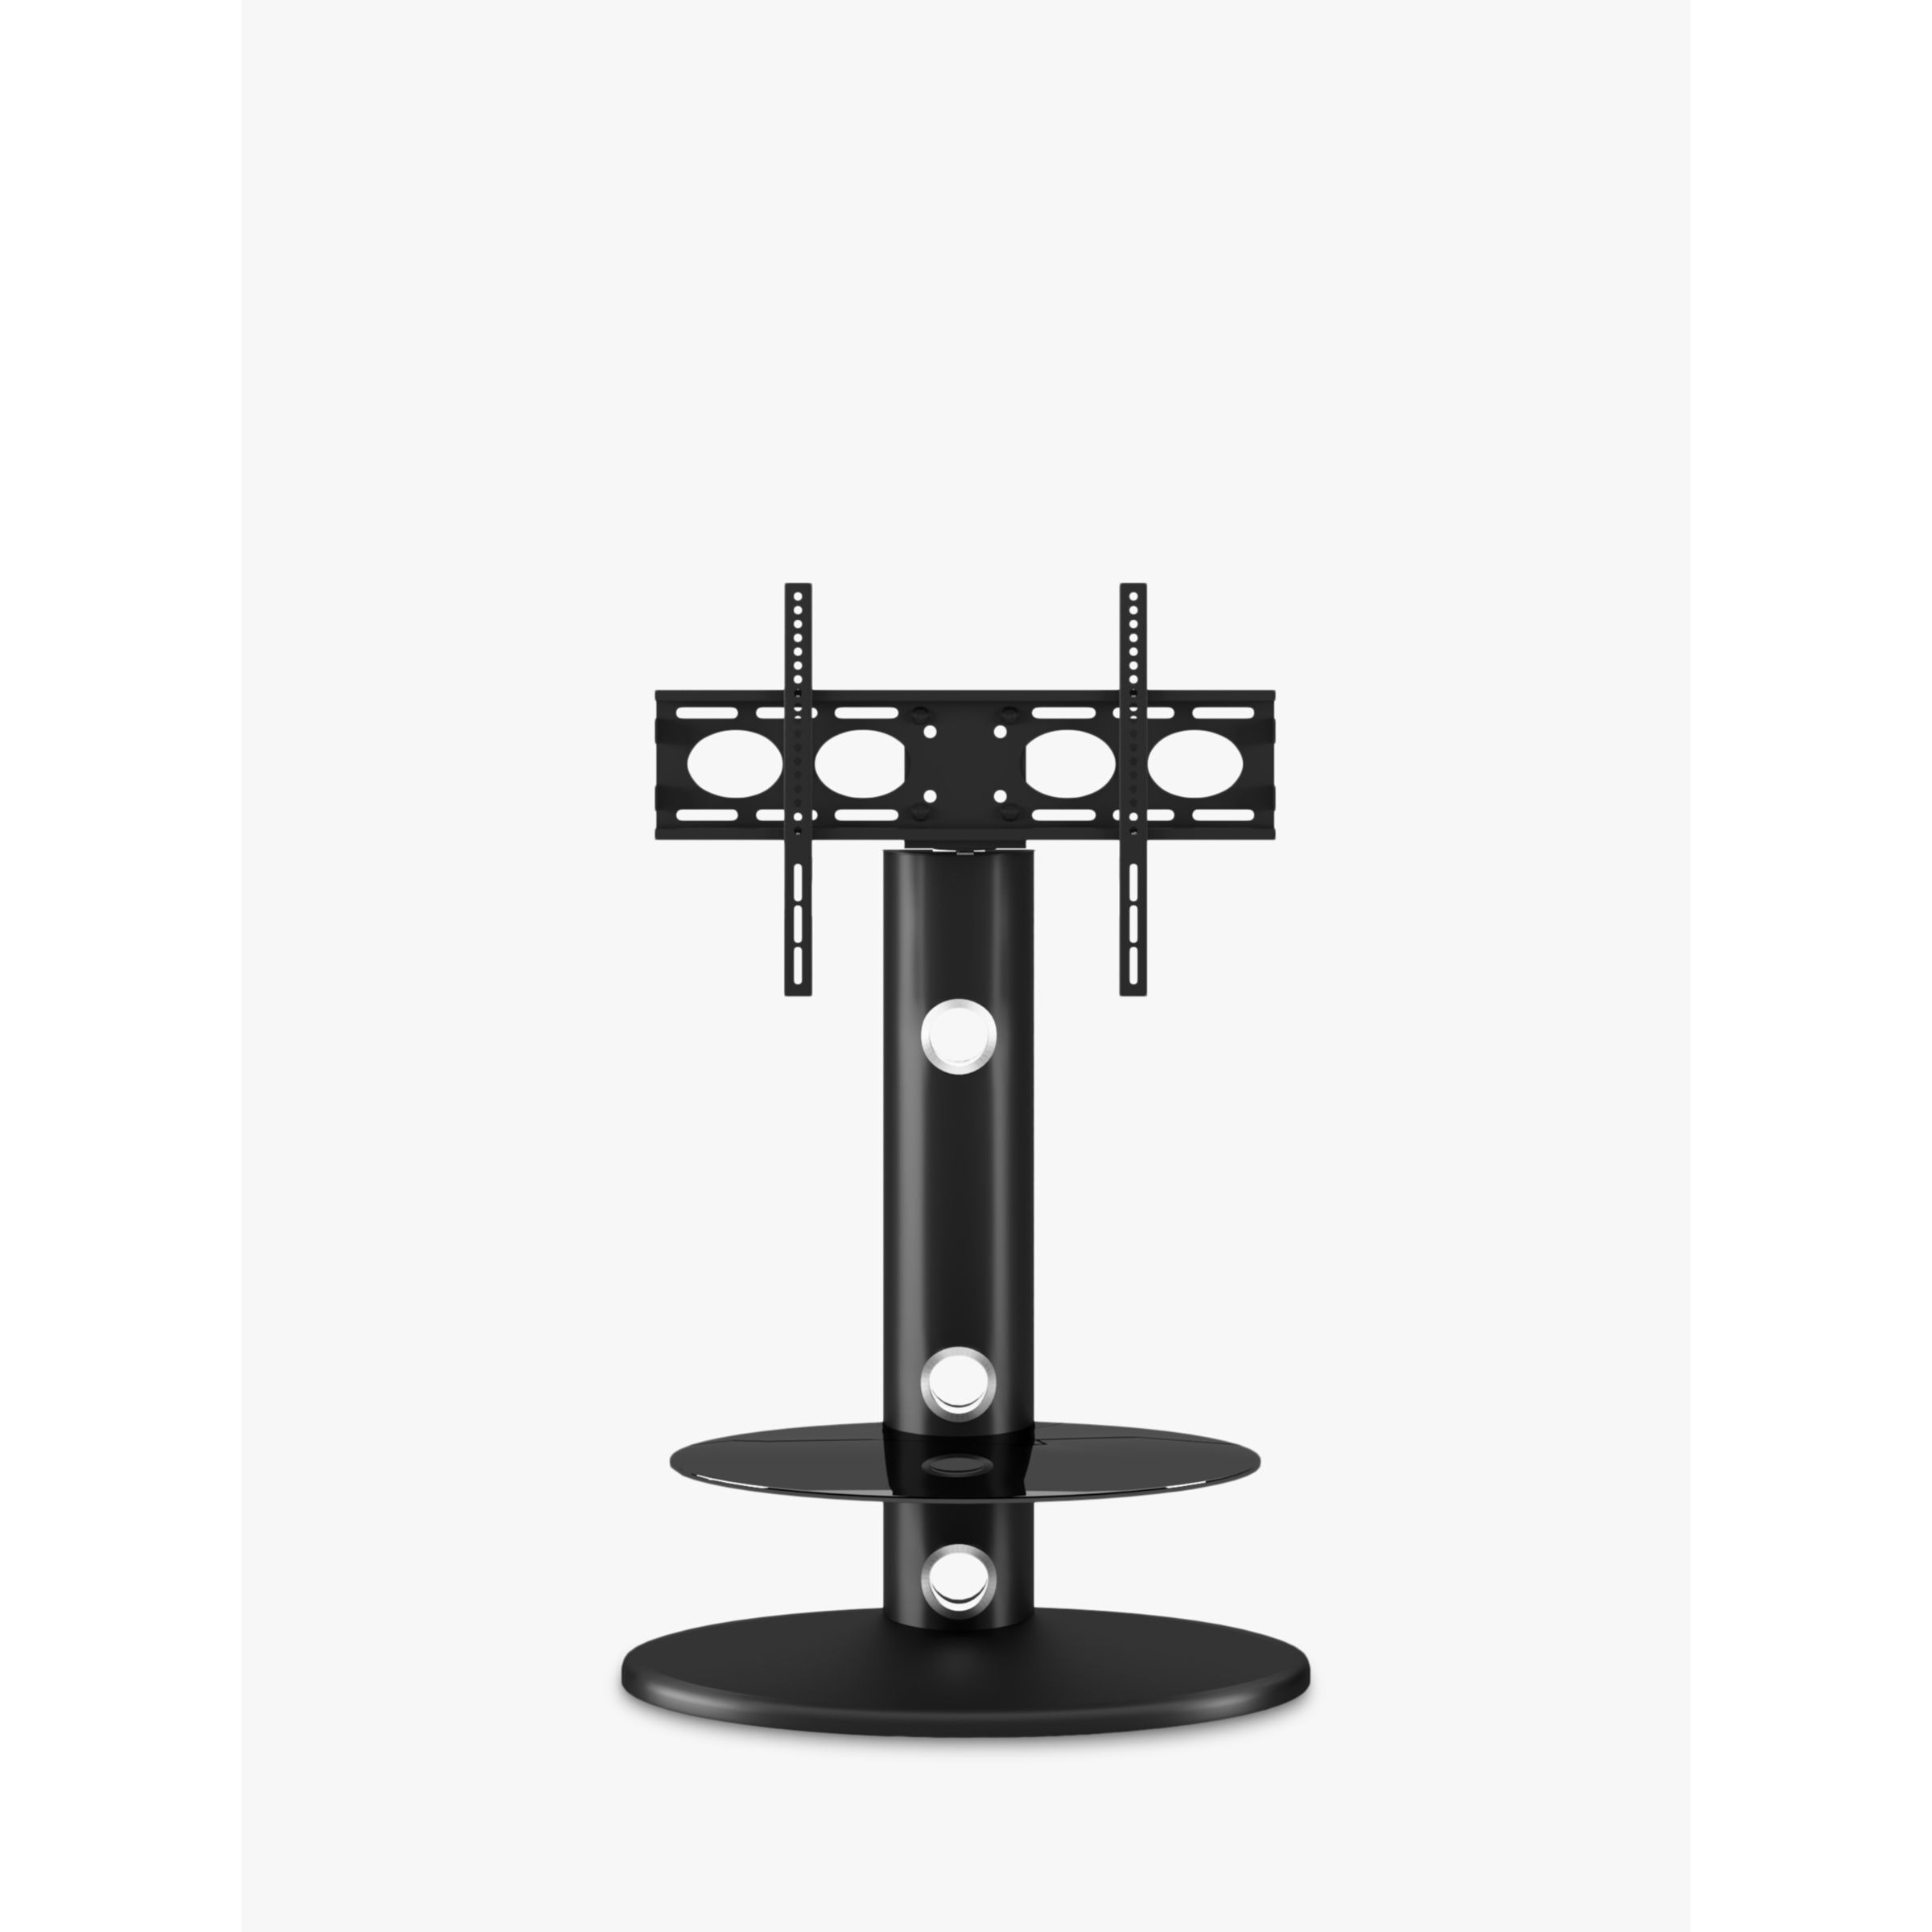 Alphason Argon Oval Pedestal TV Stand with Mount for TVs up to 50”, Black - image 1